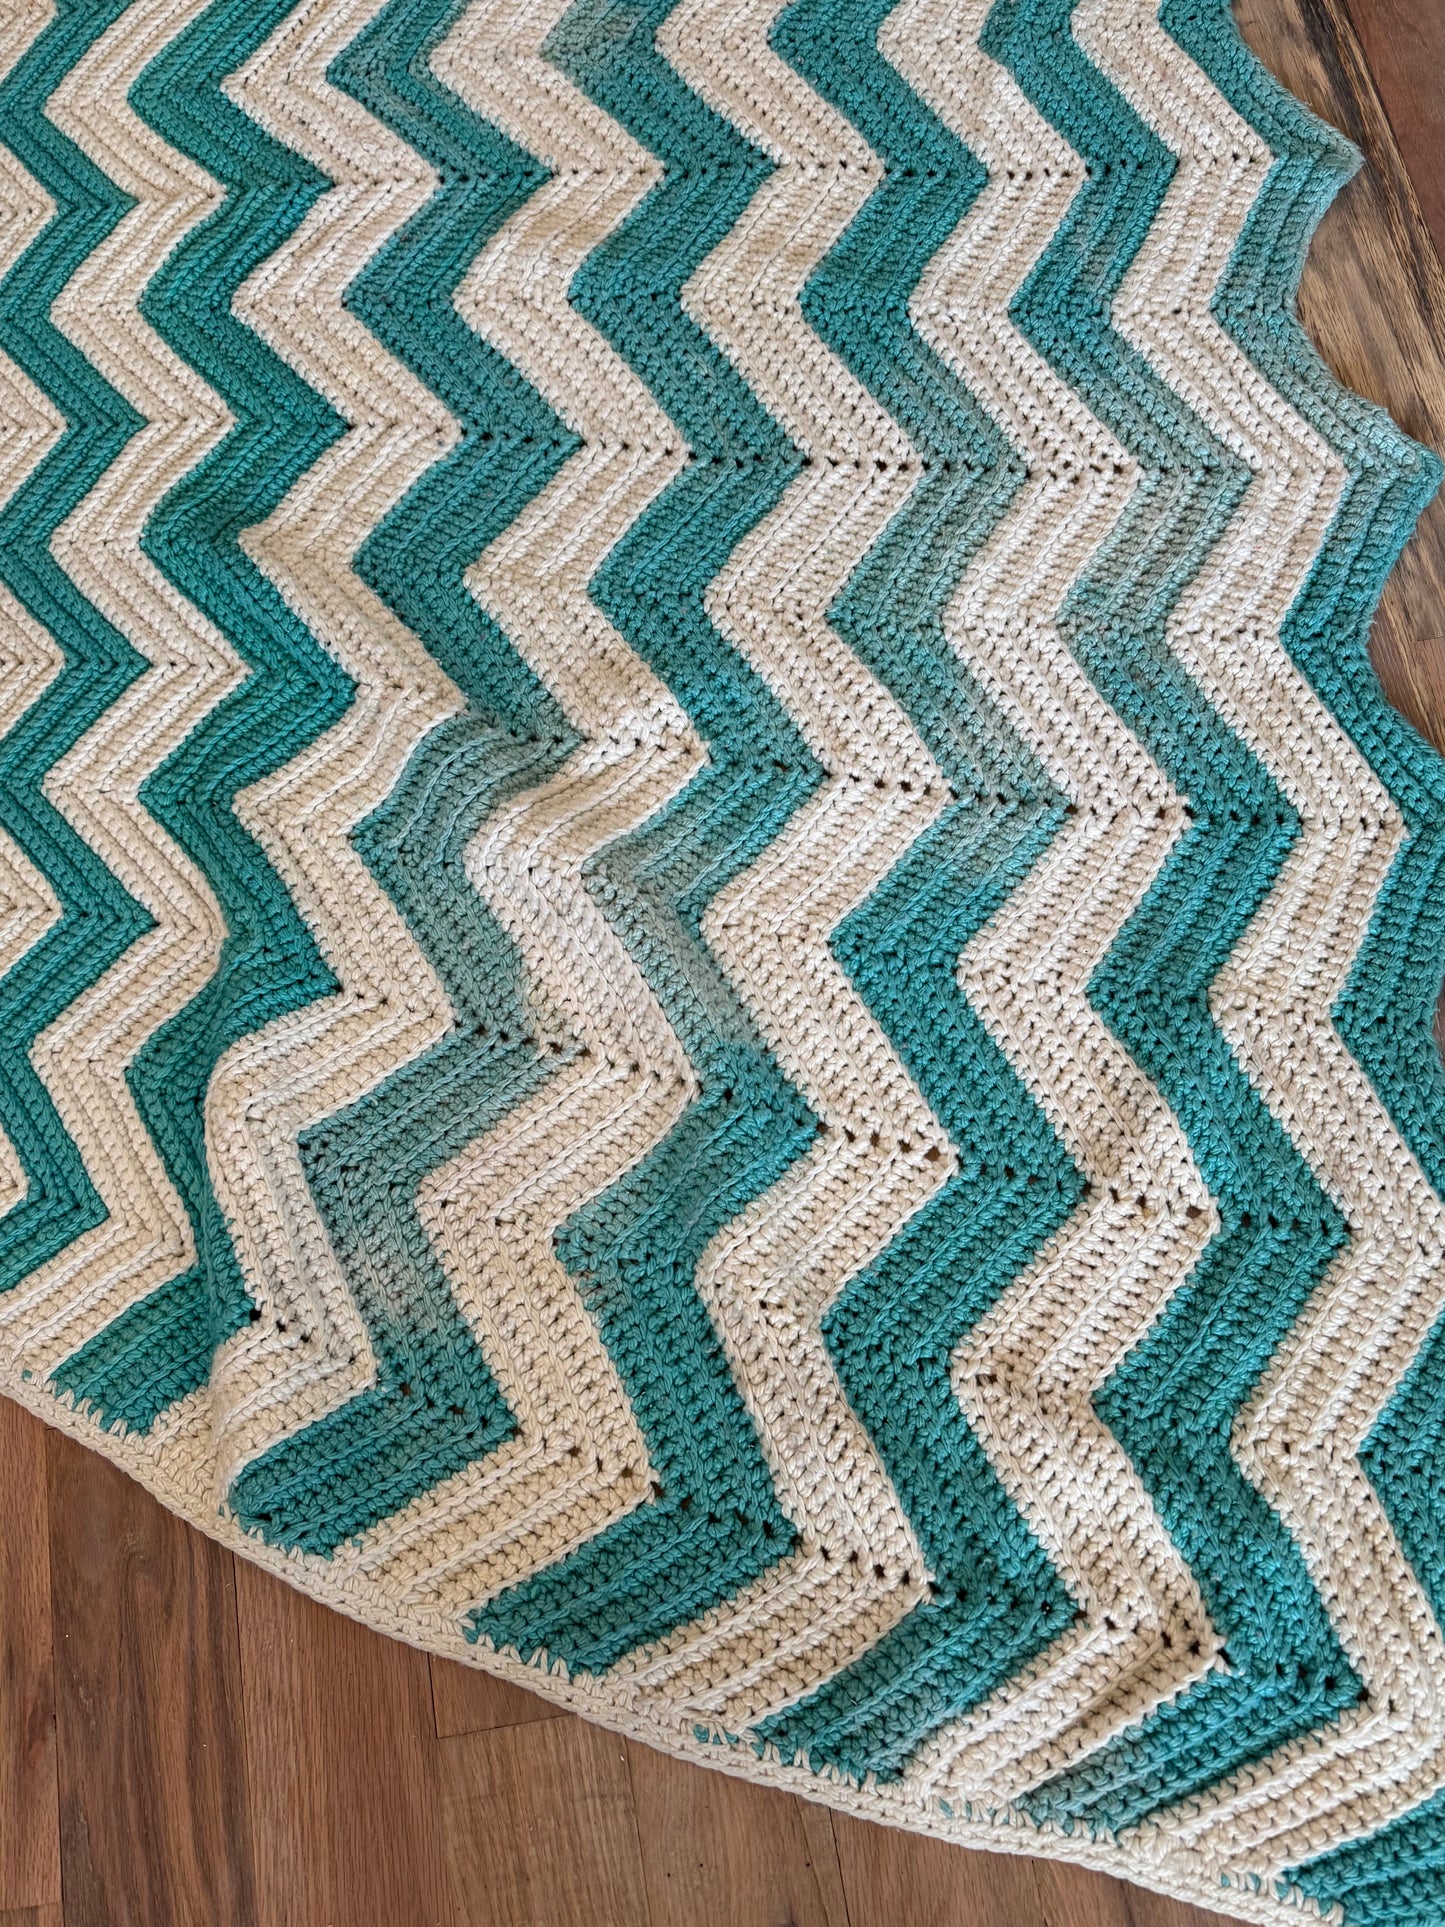 Turquoise & White Chevron Afghan - has imperfections and shown 72x50